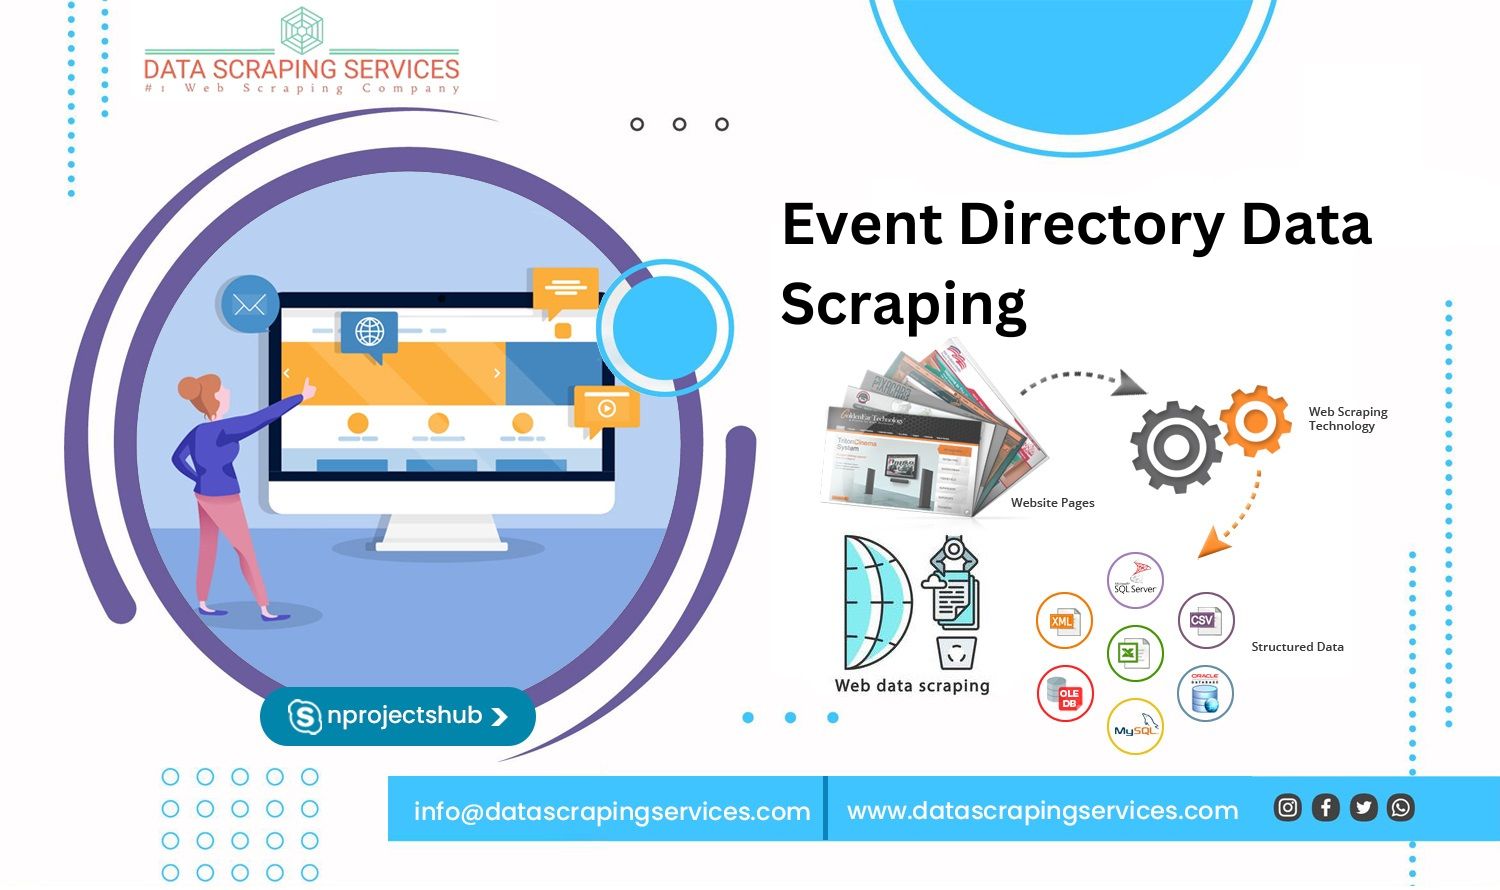 Event Directory Data Scraping